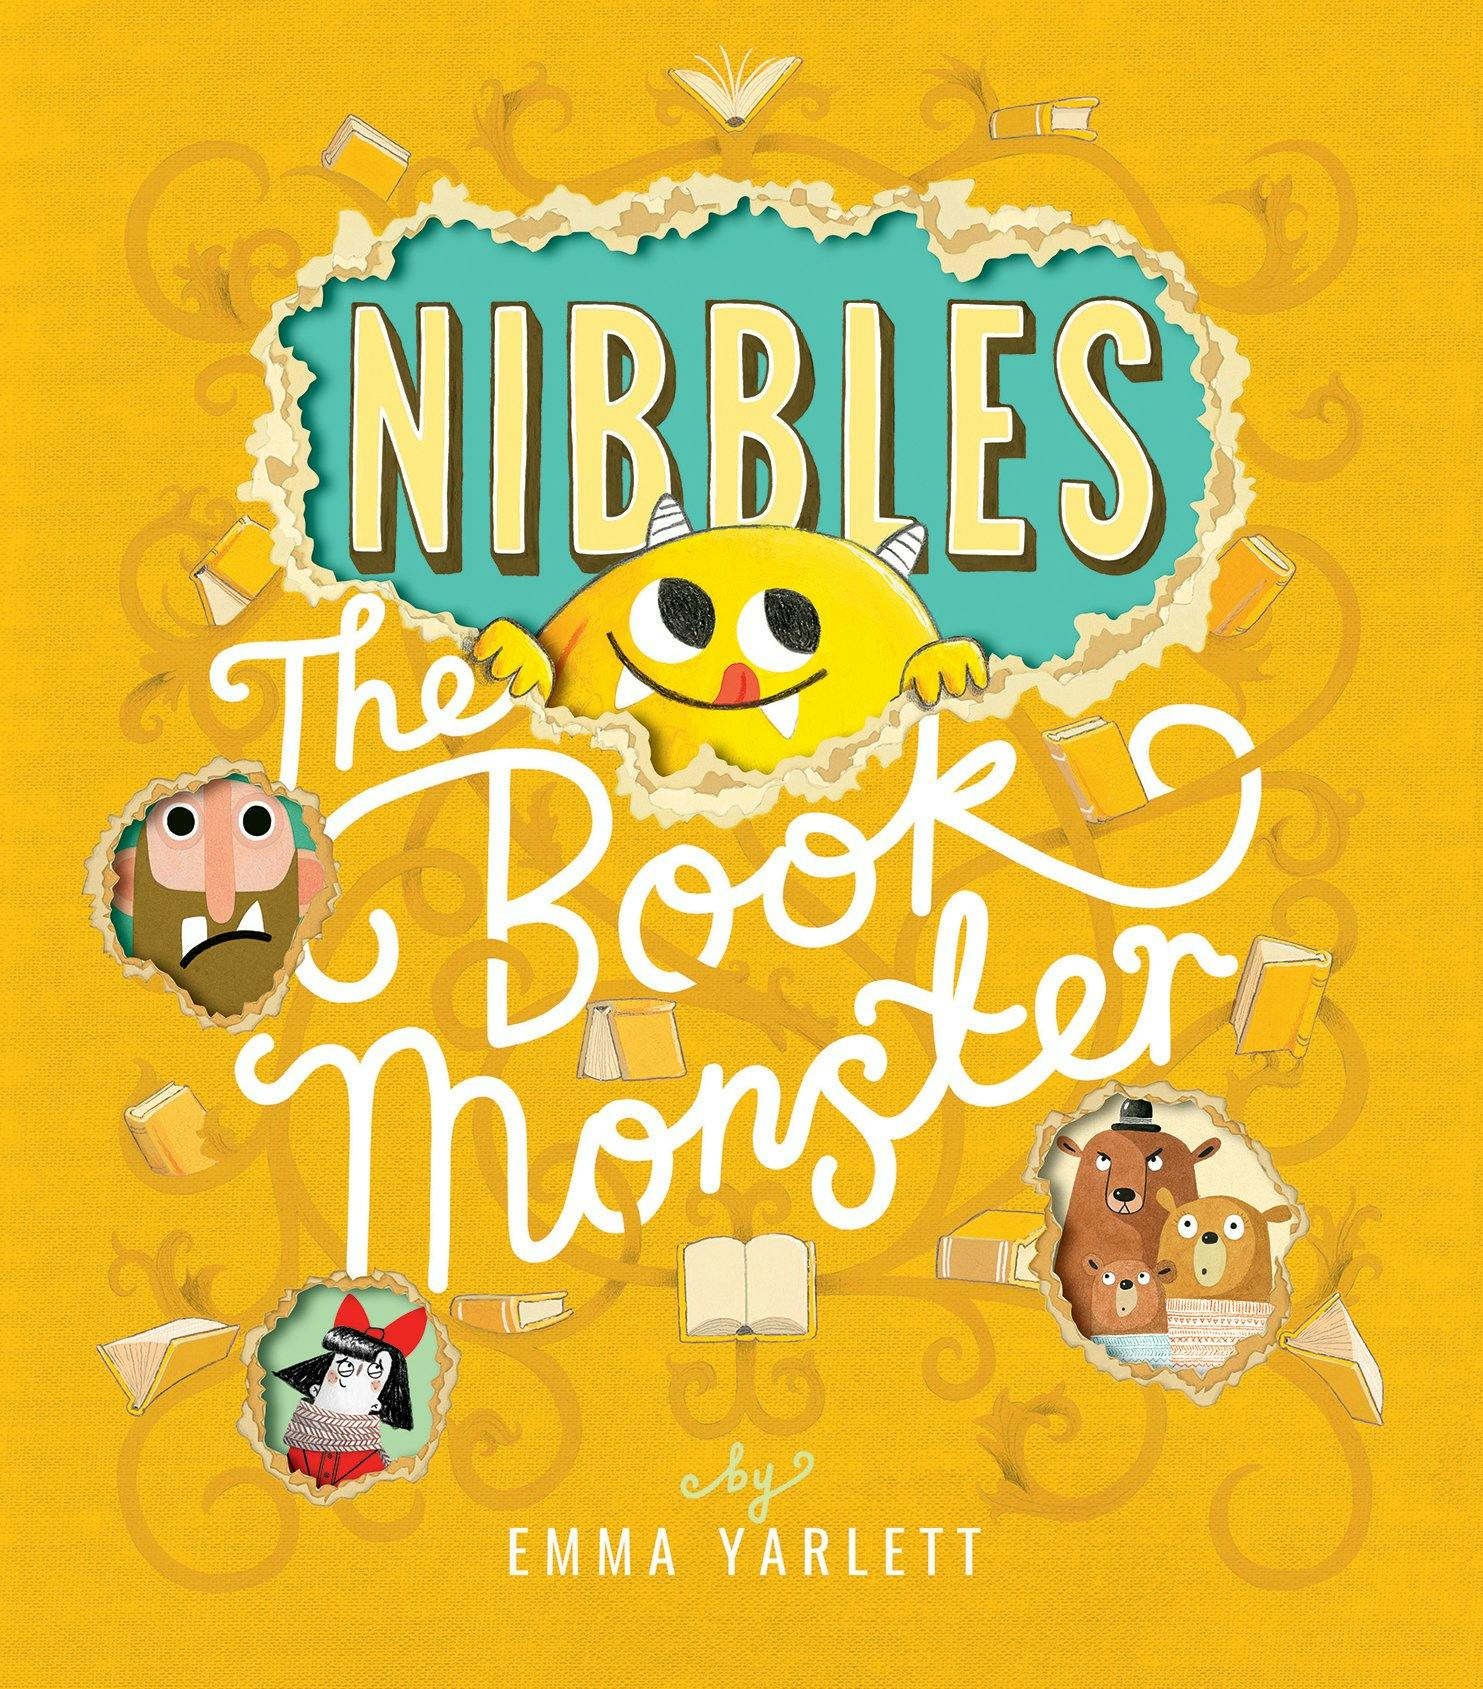 Usborne Nibbles The Book Monster